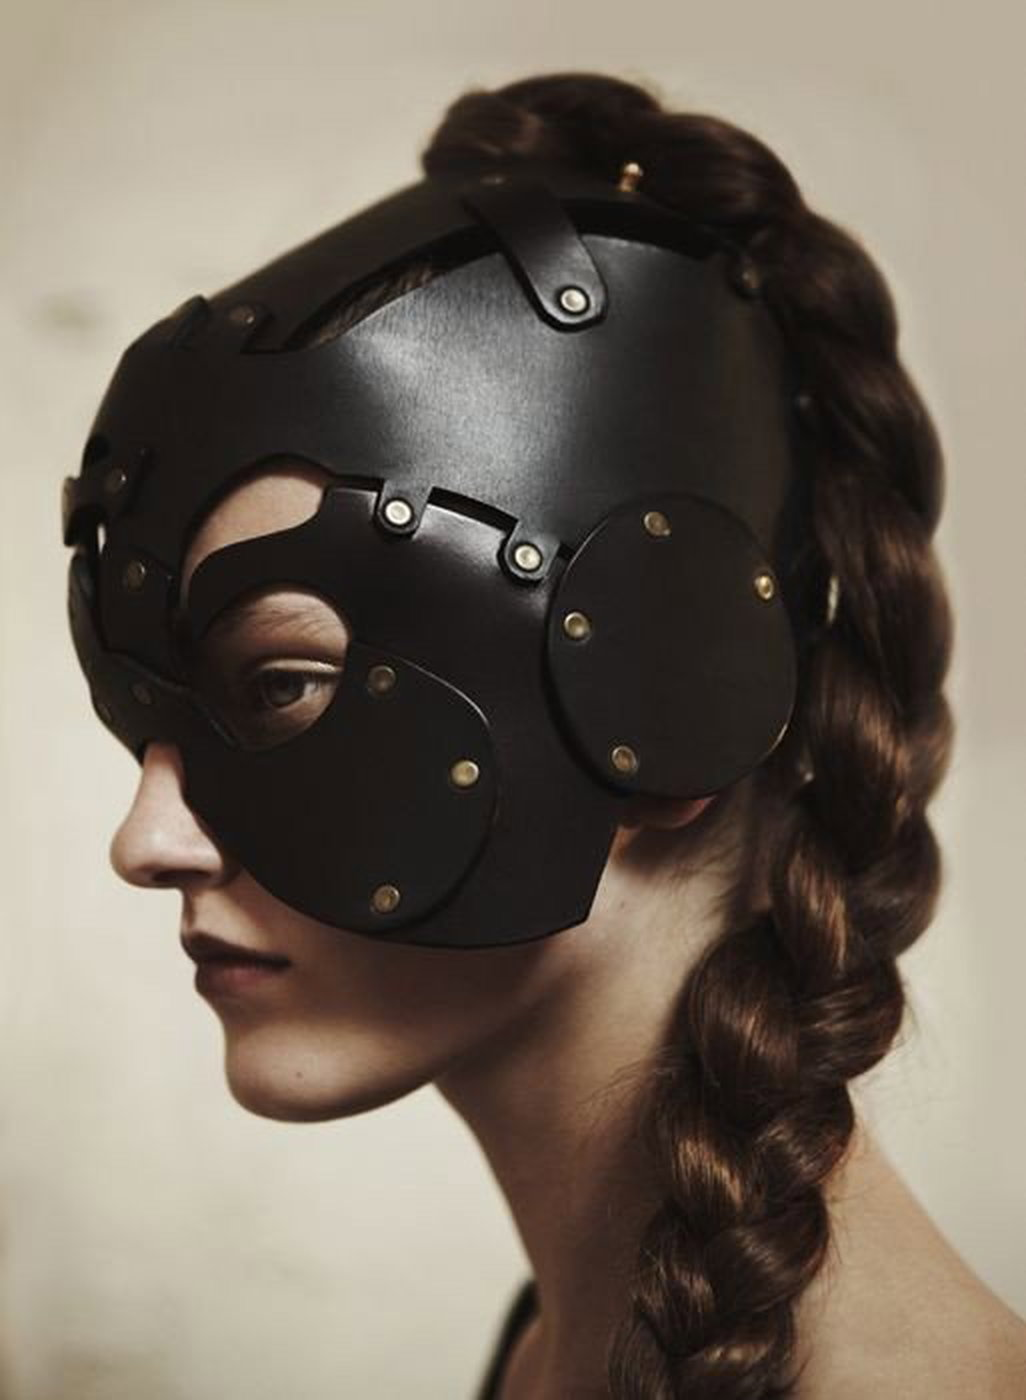 Watch the Photo by sparking.joy with the username @sparking.joy, who is a verified user, posted on November 23, 2023. The post is about the topic Bondage. and the text says 'The new task mask, designed to help you stay focused on whatever task is at hand. #bondage #mask'